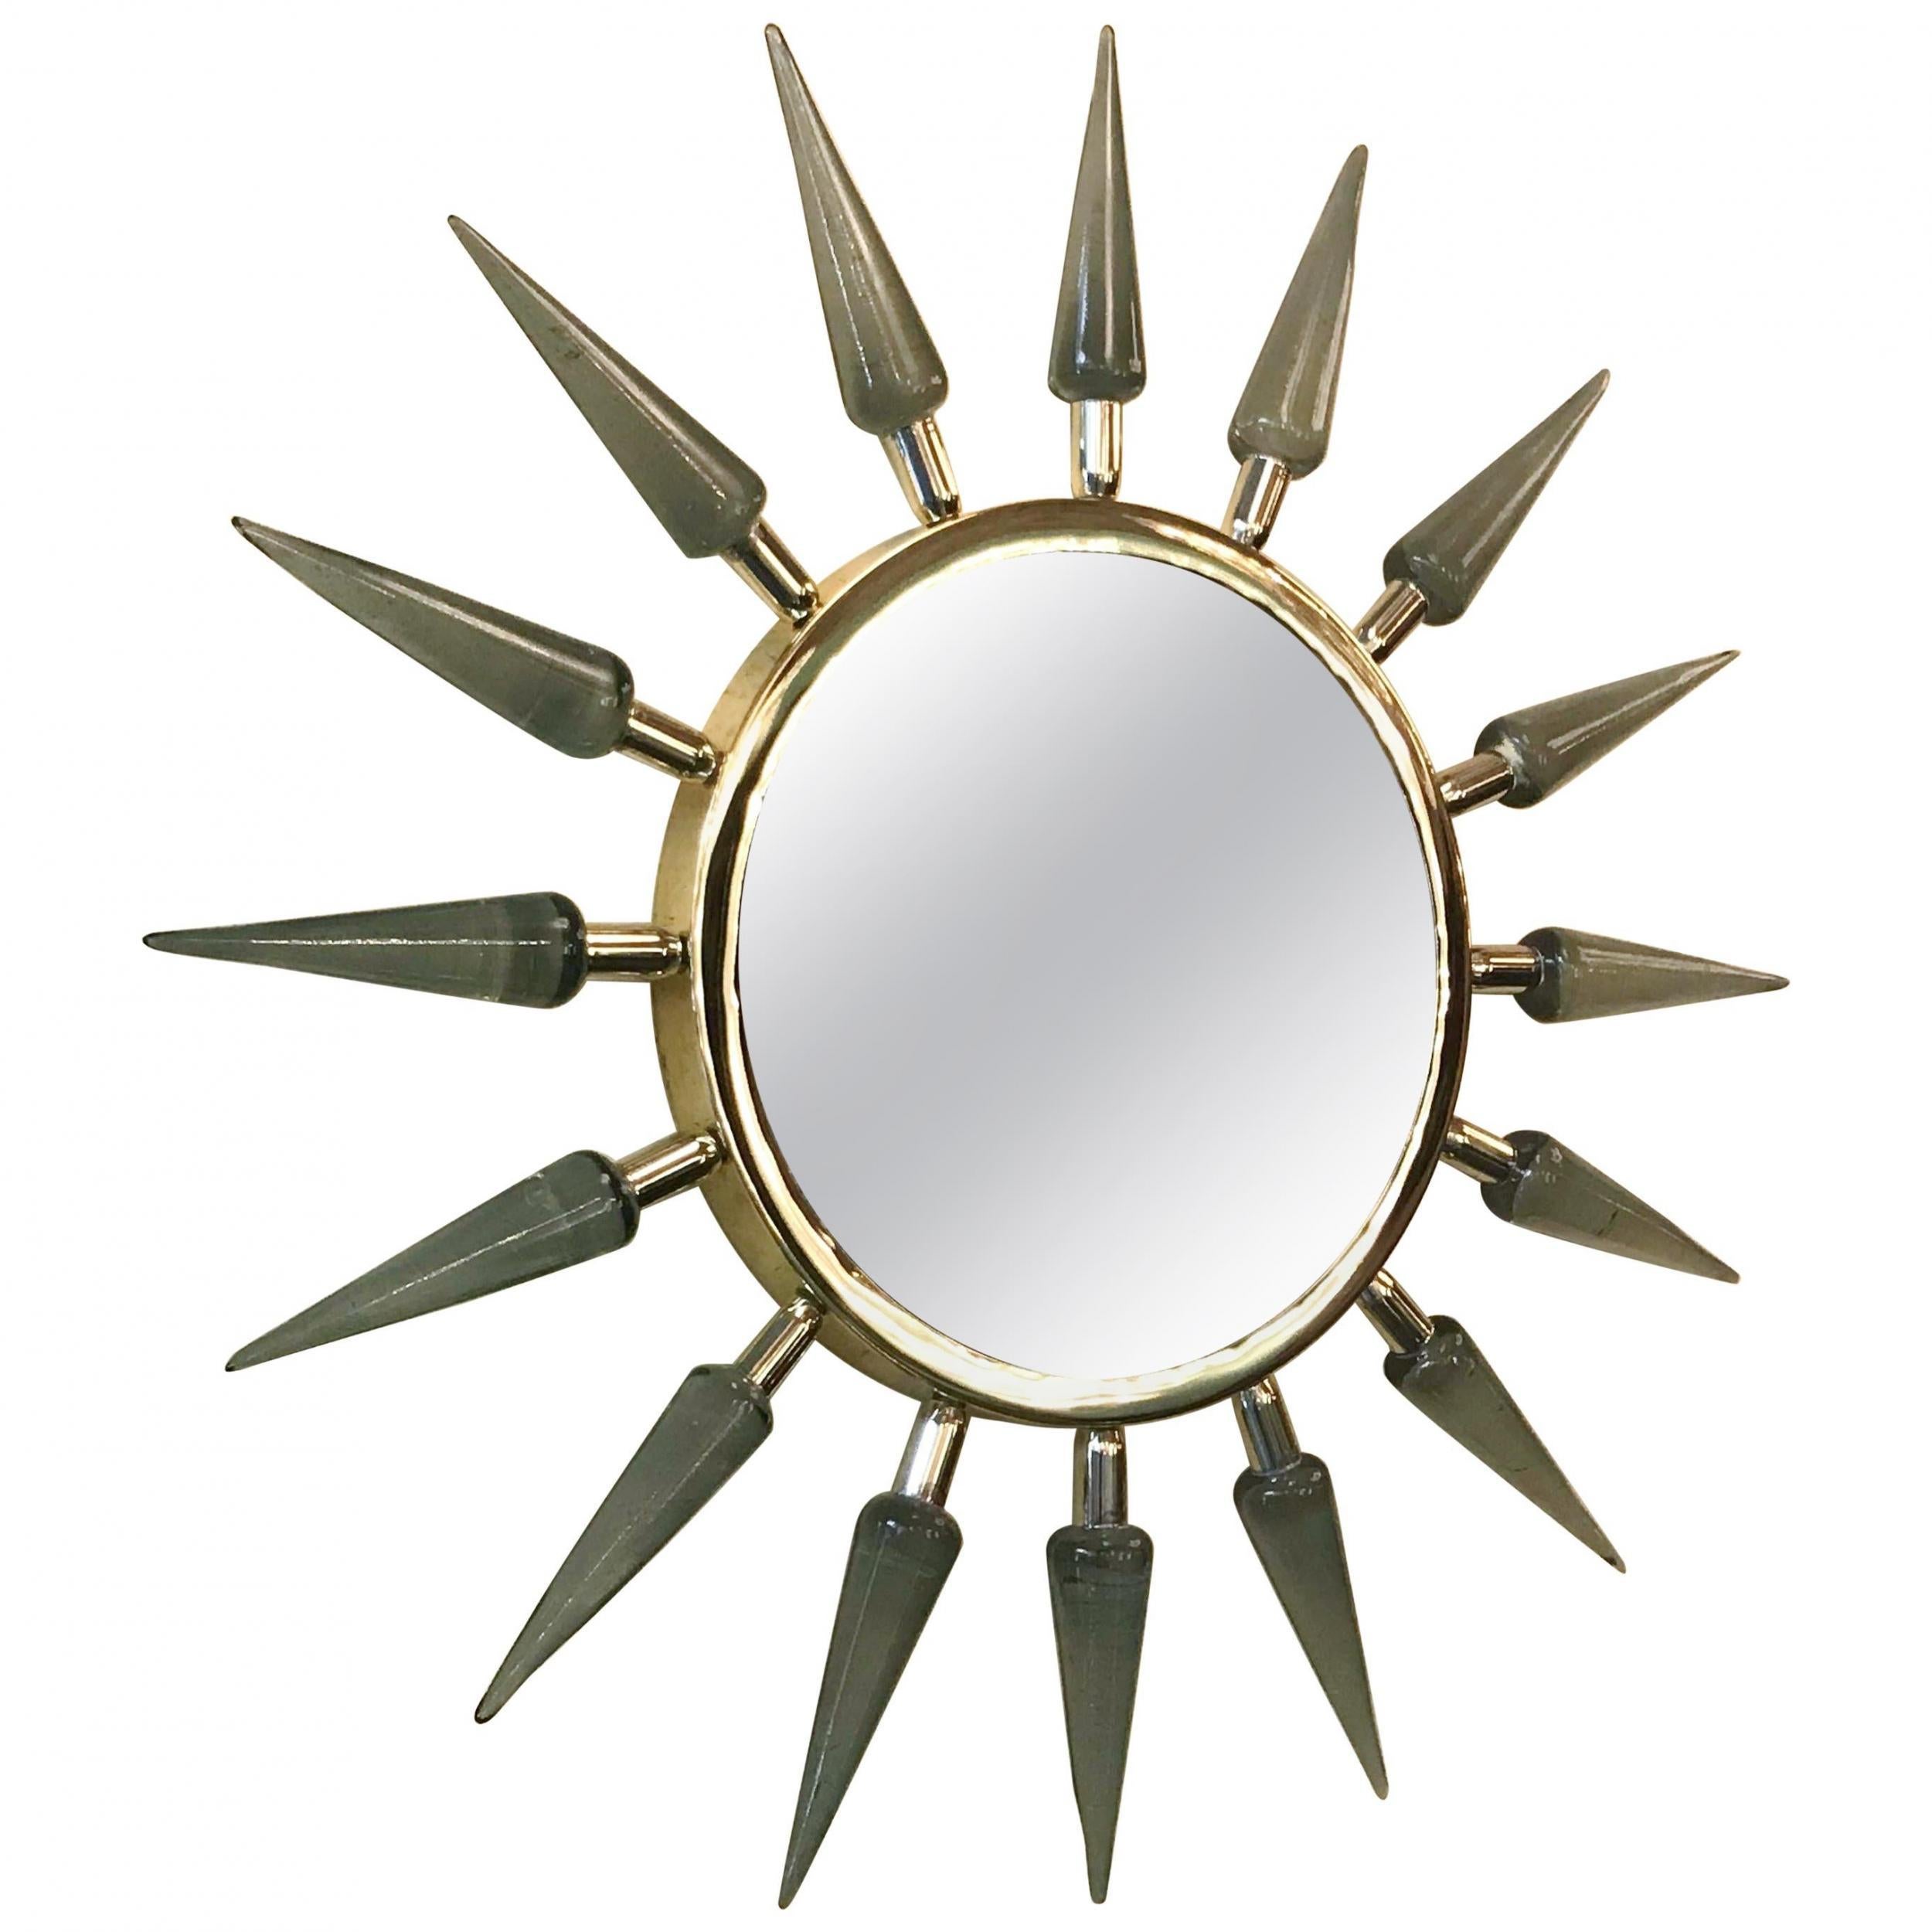 Pair of Italian mirrors with smoky hand blown Murano glass spikes mounted on 24-karat gold-plated frame

Made in Italy, 21st century.